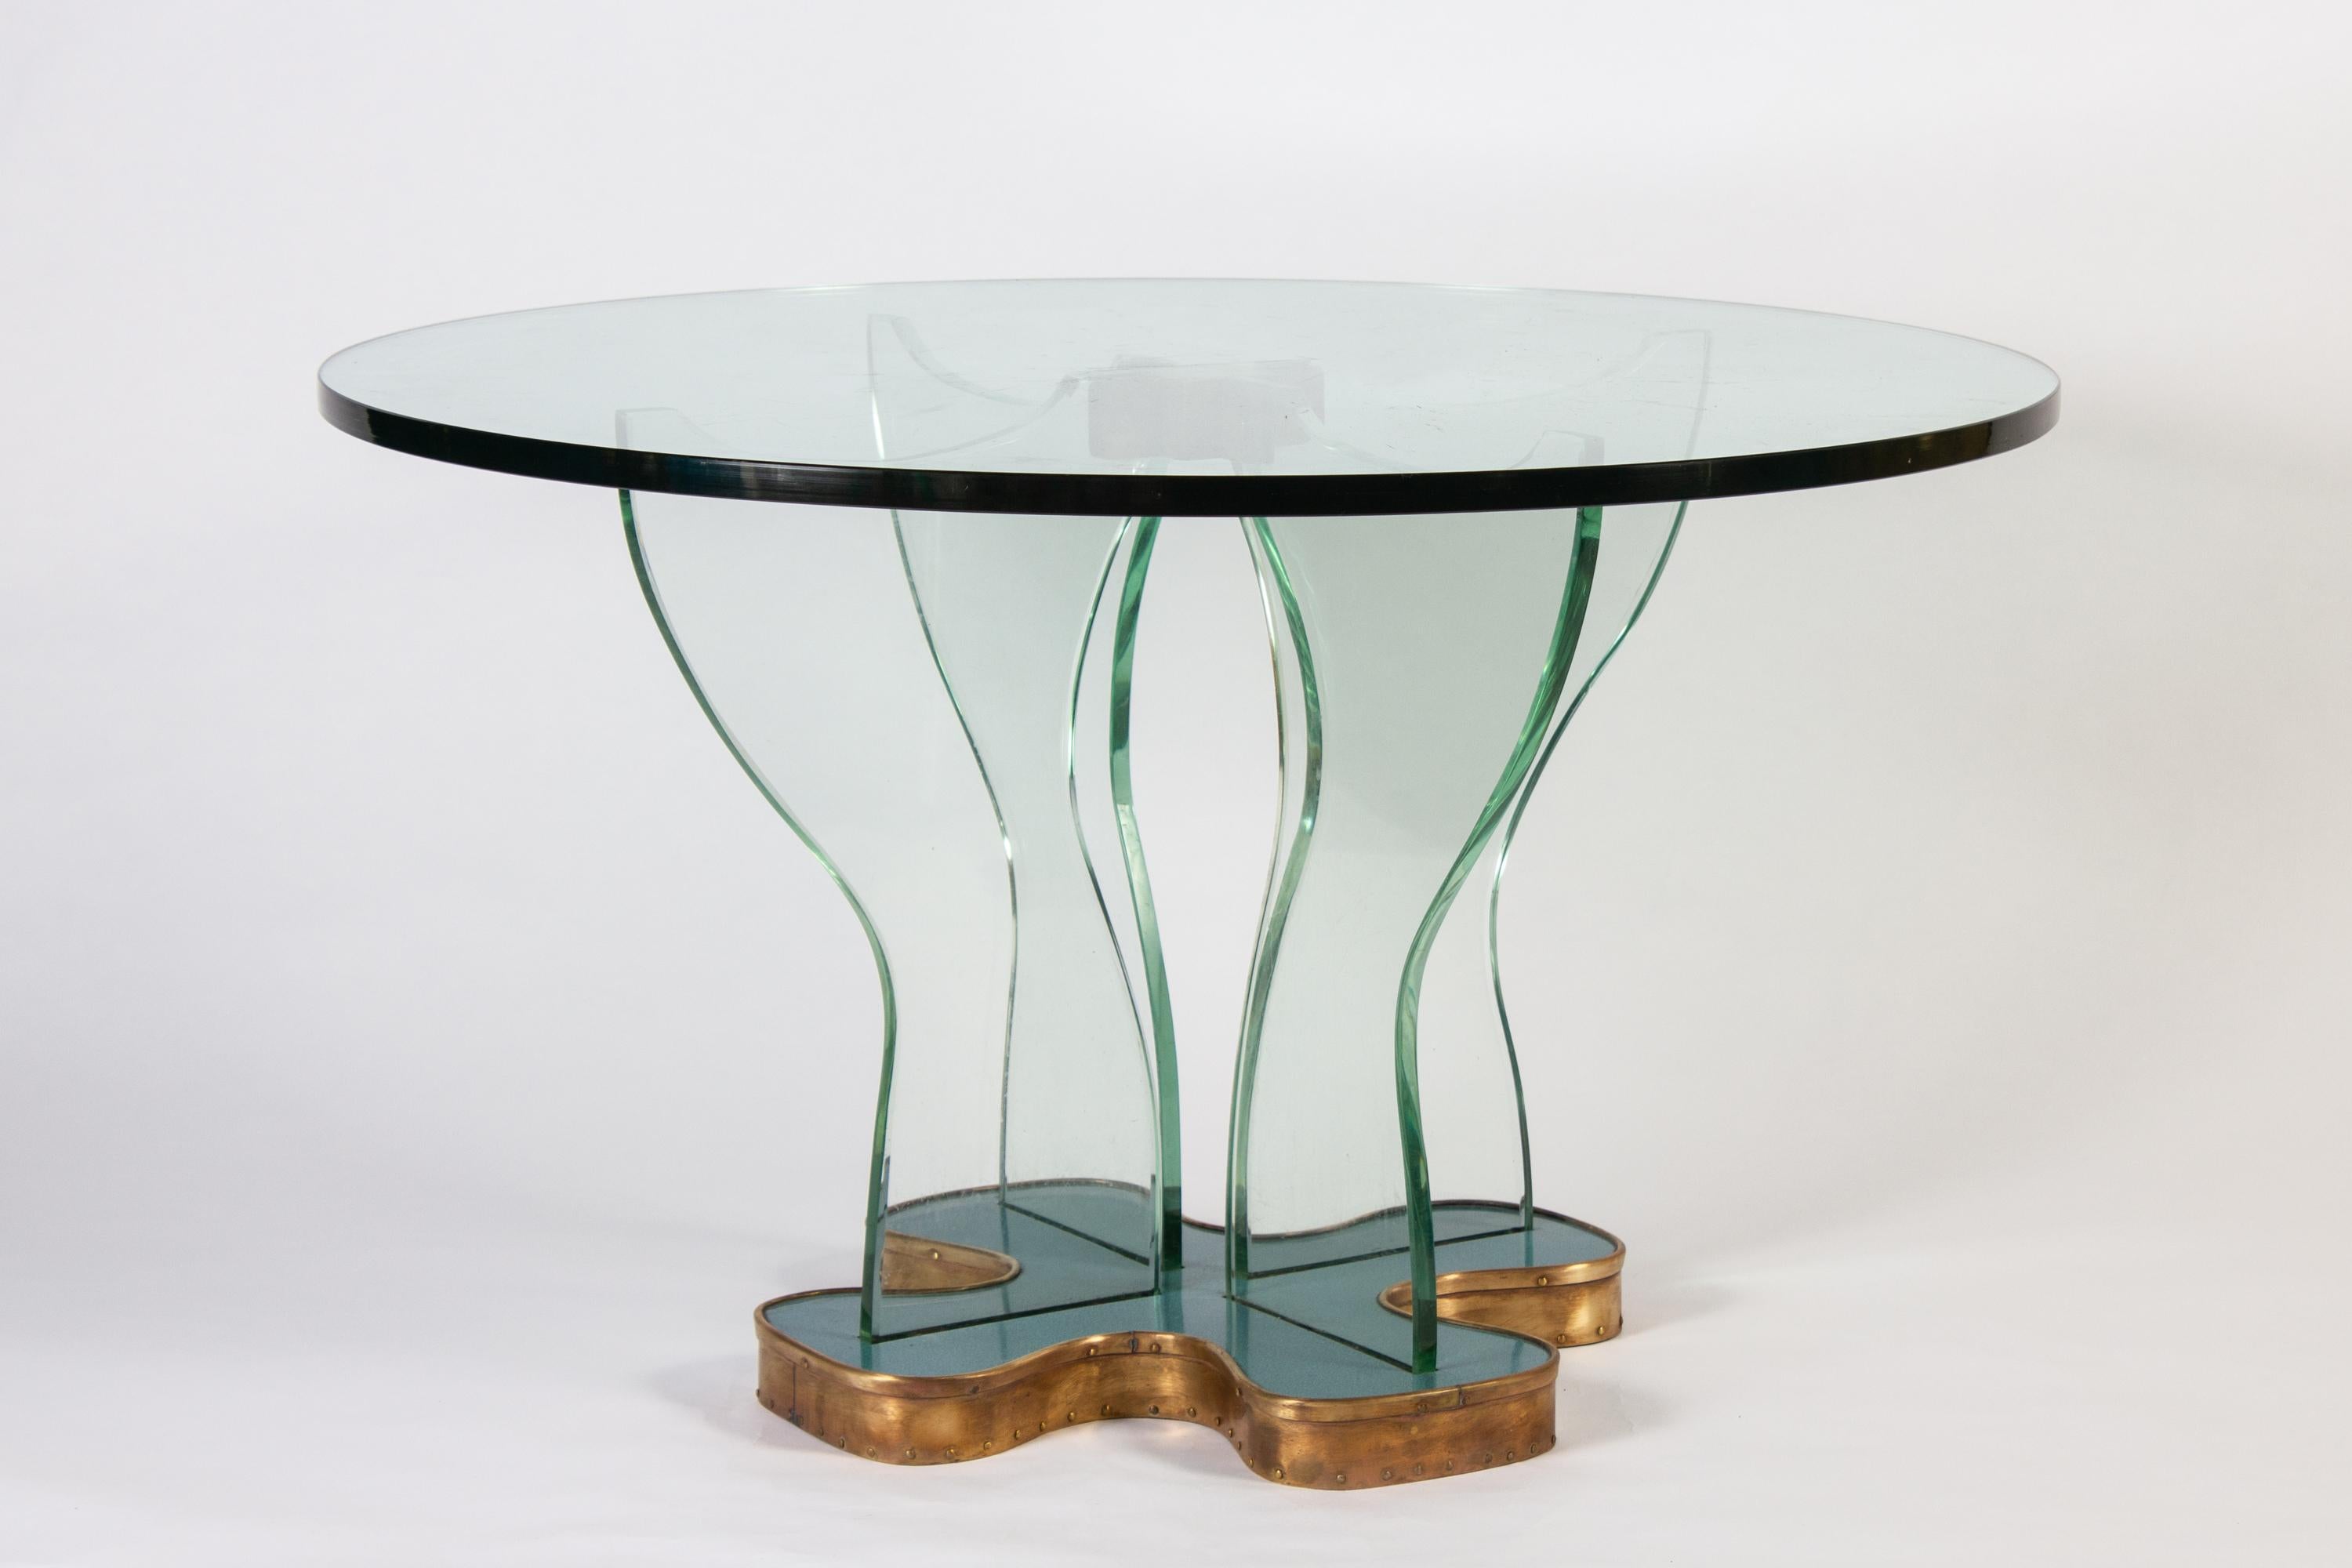 Round Glass Center or Caffe Table Attr. to Fontana Arte, Italy, 1940 For Sale 7